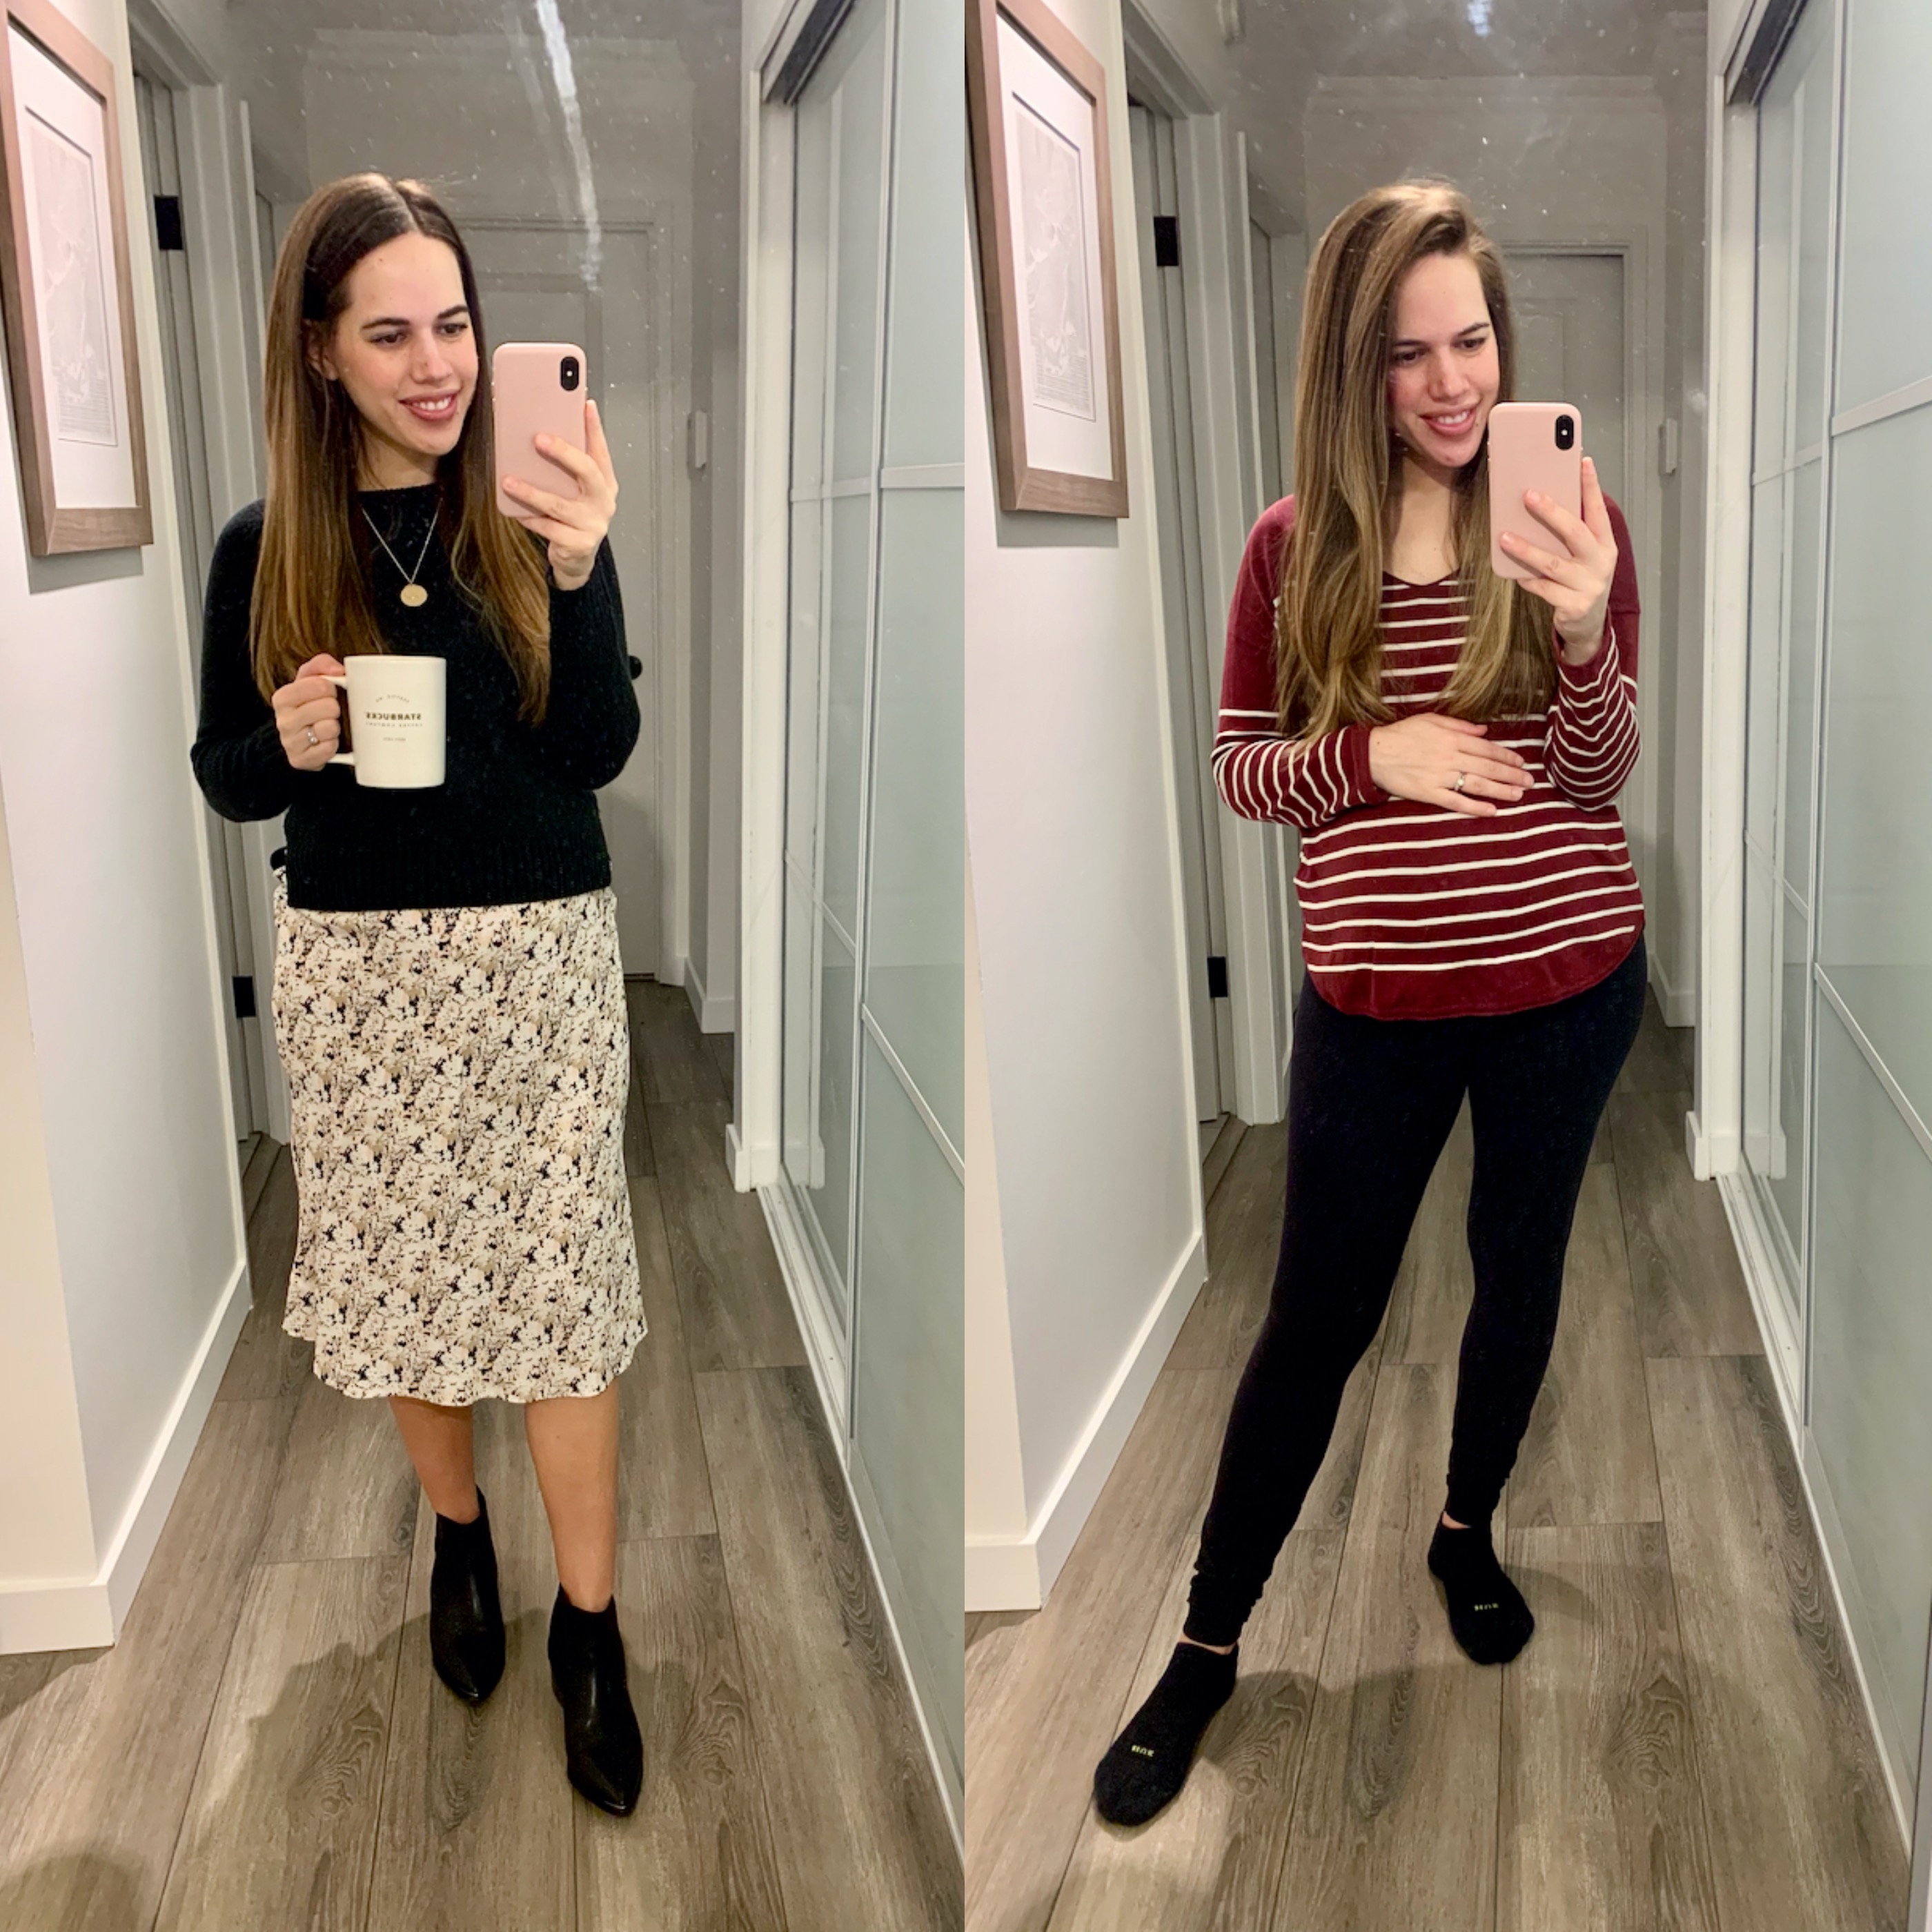 jules in flats: February 2021 Outfits Week 1